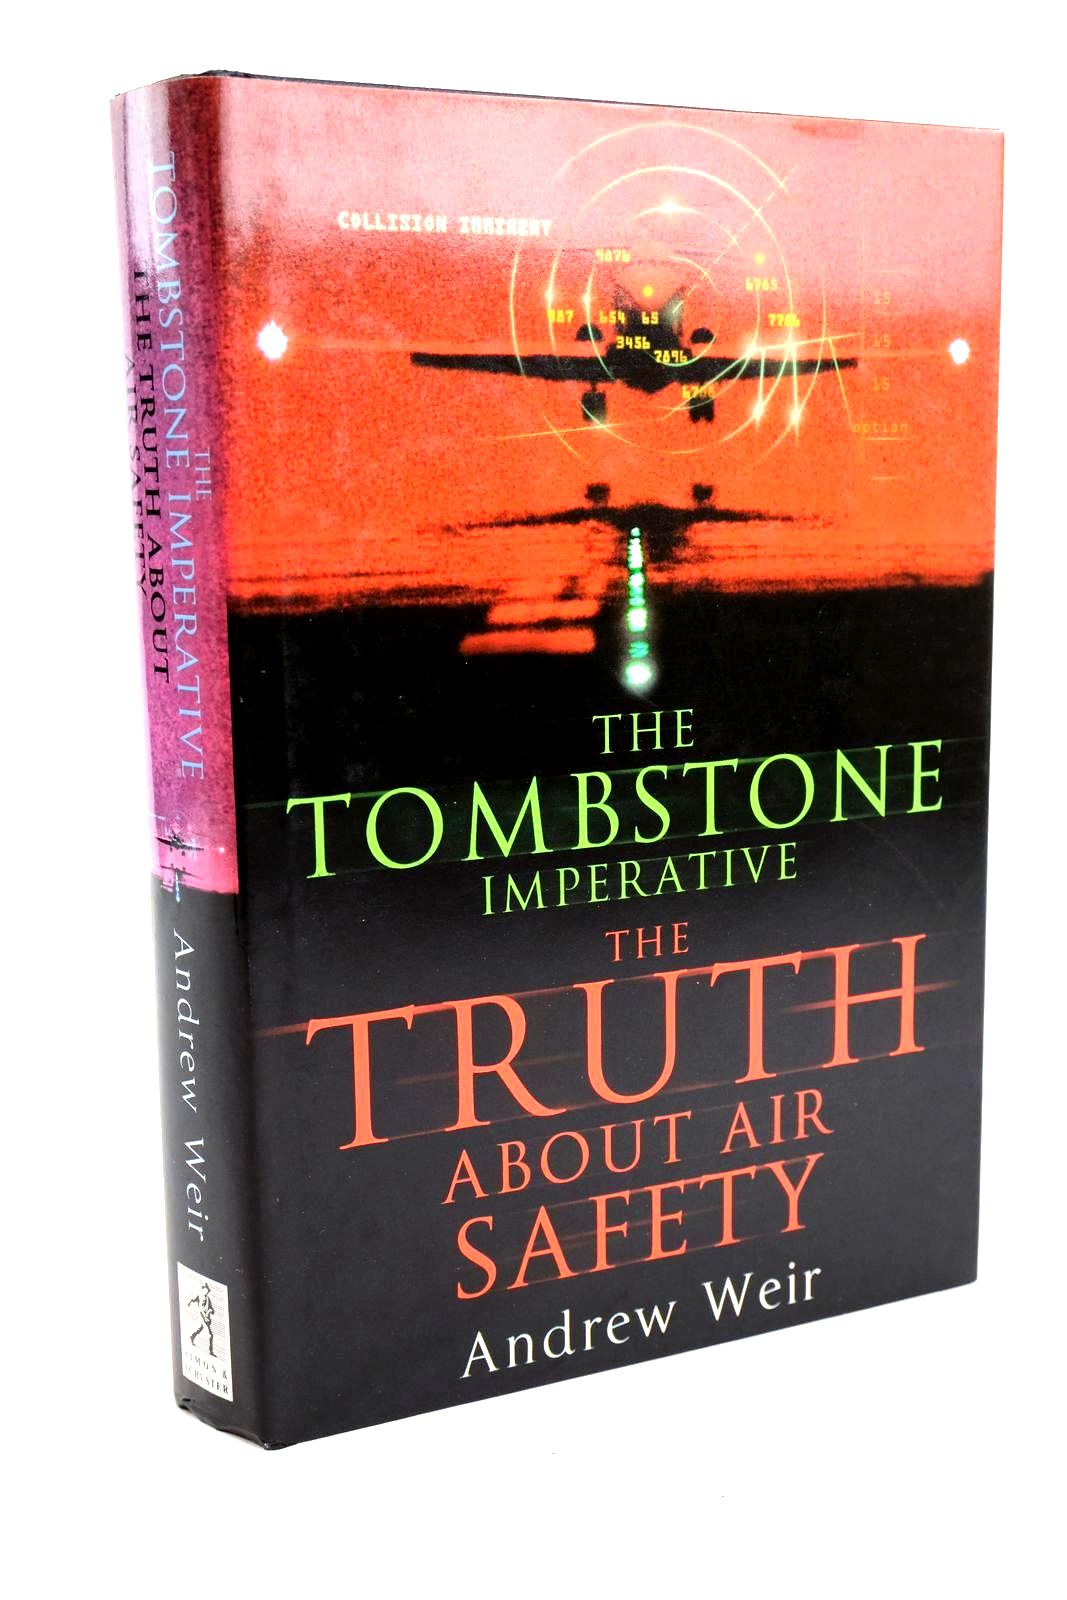 Photo of THE TOMBSTONE IMPERATIVE - THE TRUTH ABOUT AIR SAFETY written by Weir, Andrew published by Simon &amp; Schuster Uk Ltd (STOCK CODE: 1320215)  for sale by Stella & Rose's Books